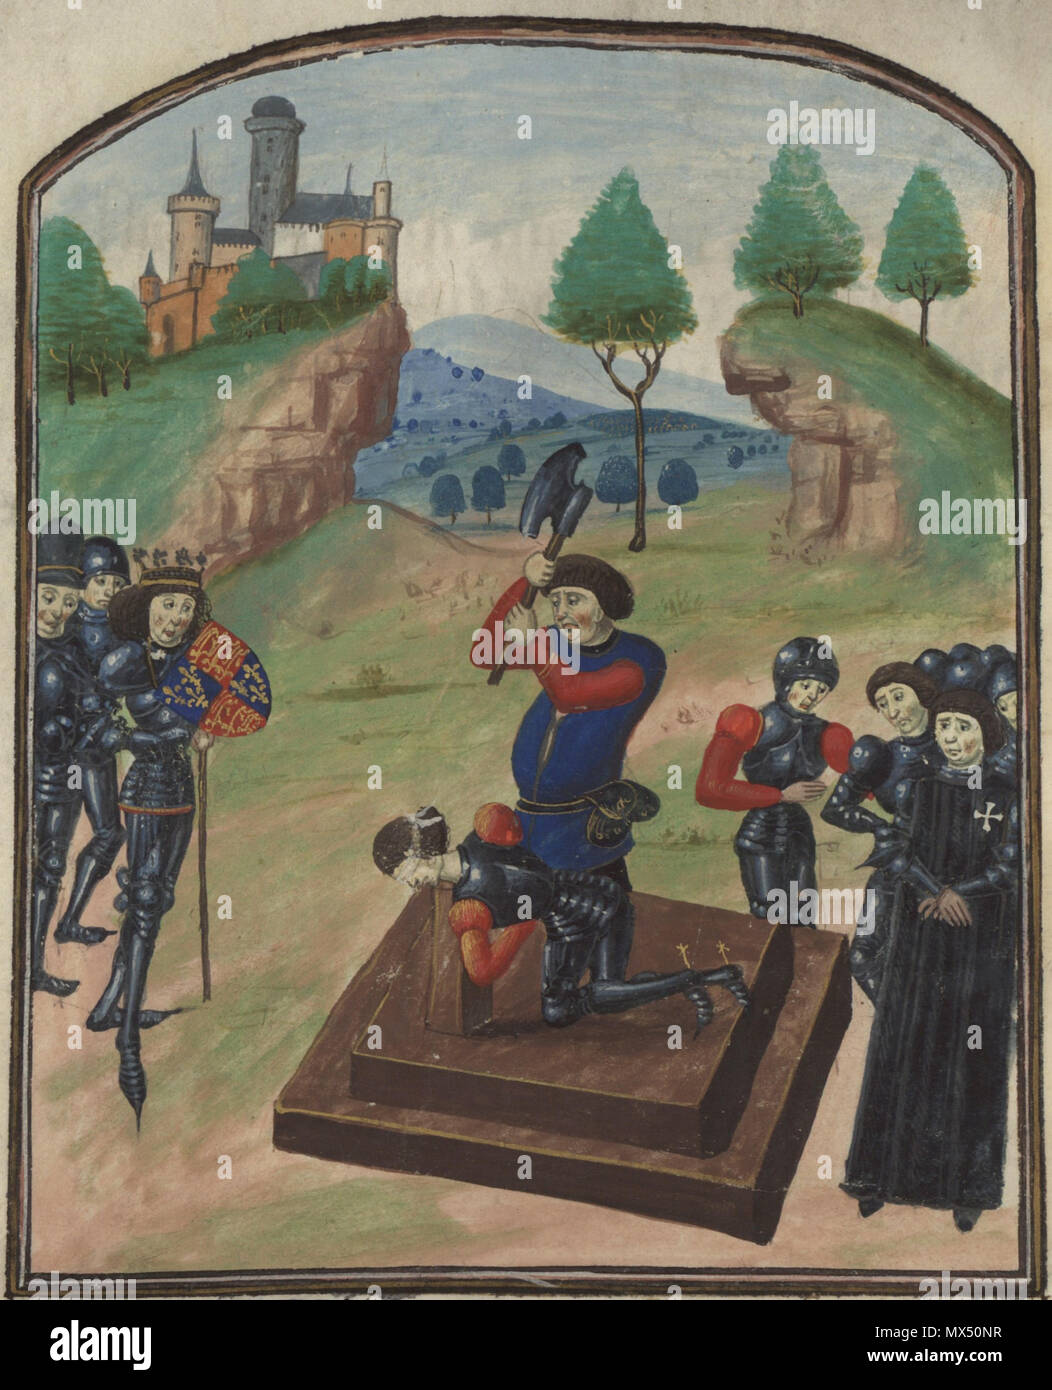 . Beheading of the Edmund Beaufort, 4th Duke of Somerset in 1471 at Tewkesbury. Edward IV watches. Illuminated miniature from Histoire de la rentrée victorieuse du roi Edouard IV en son royaume d'Angleterre . late fifteenth century 79 Beheading duke somerset Stock Photo